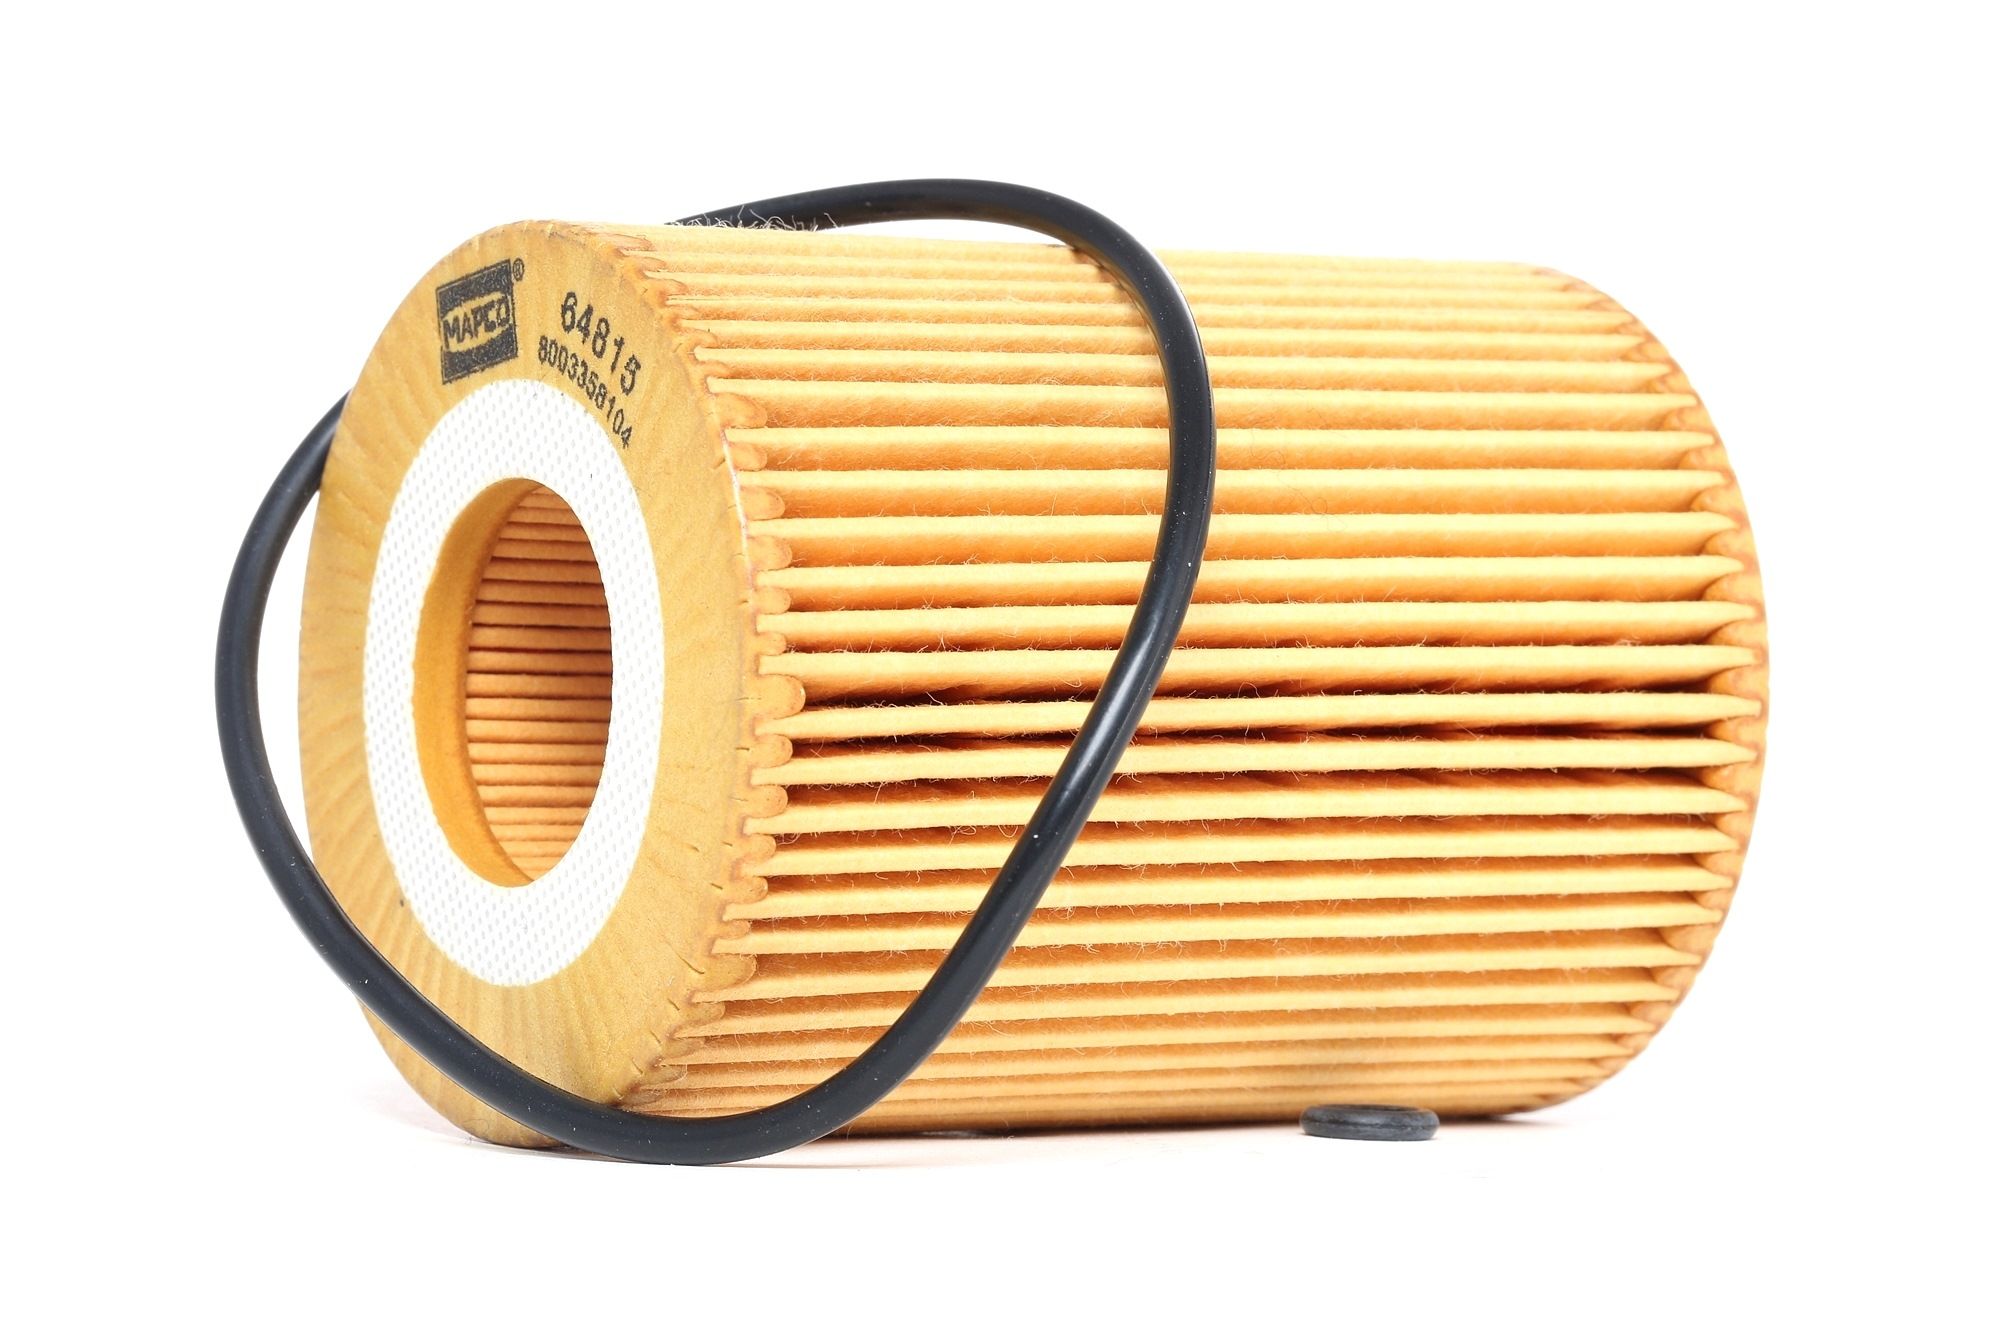 Original 64815 MAPCO Oil filter experience and price